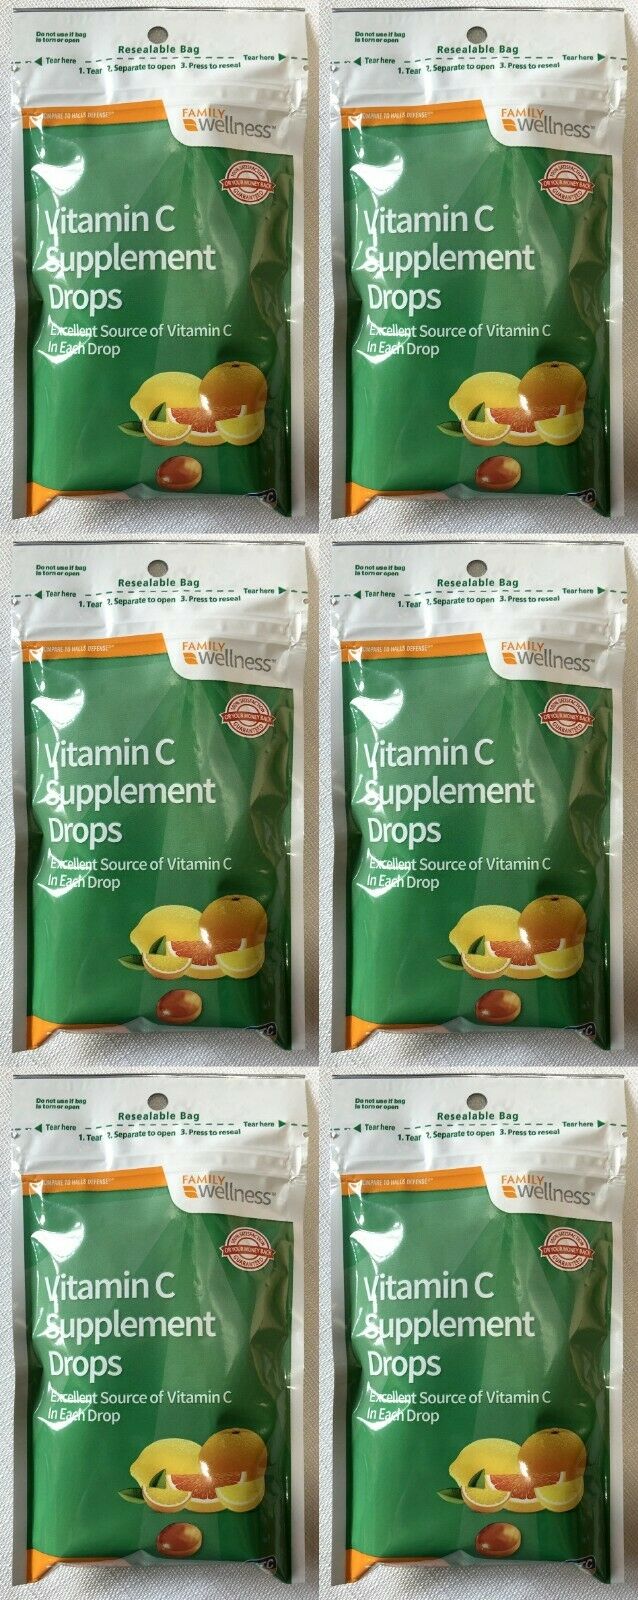 6 bags Family Wellness Vitamin C Supplement Drops 30/Pack